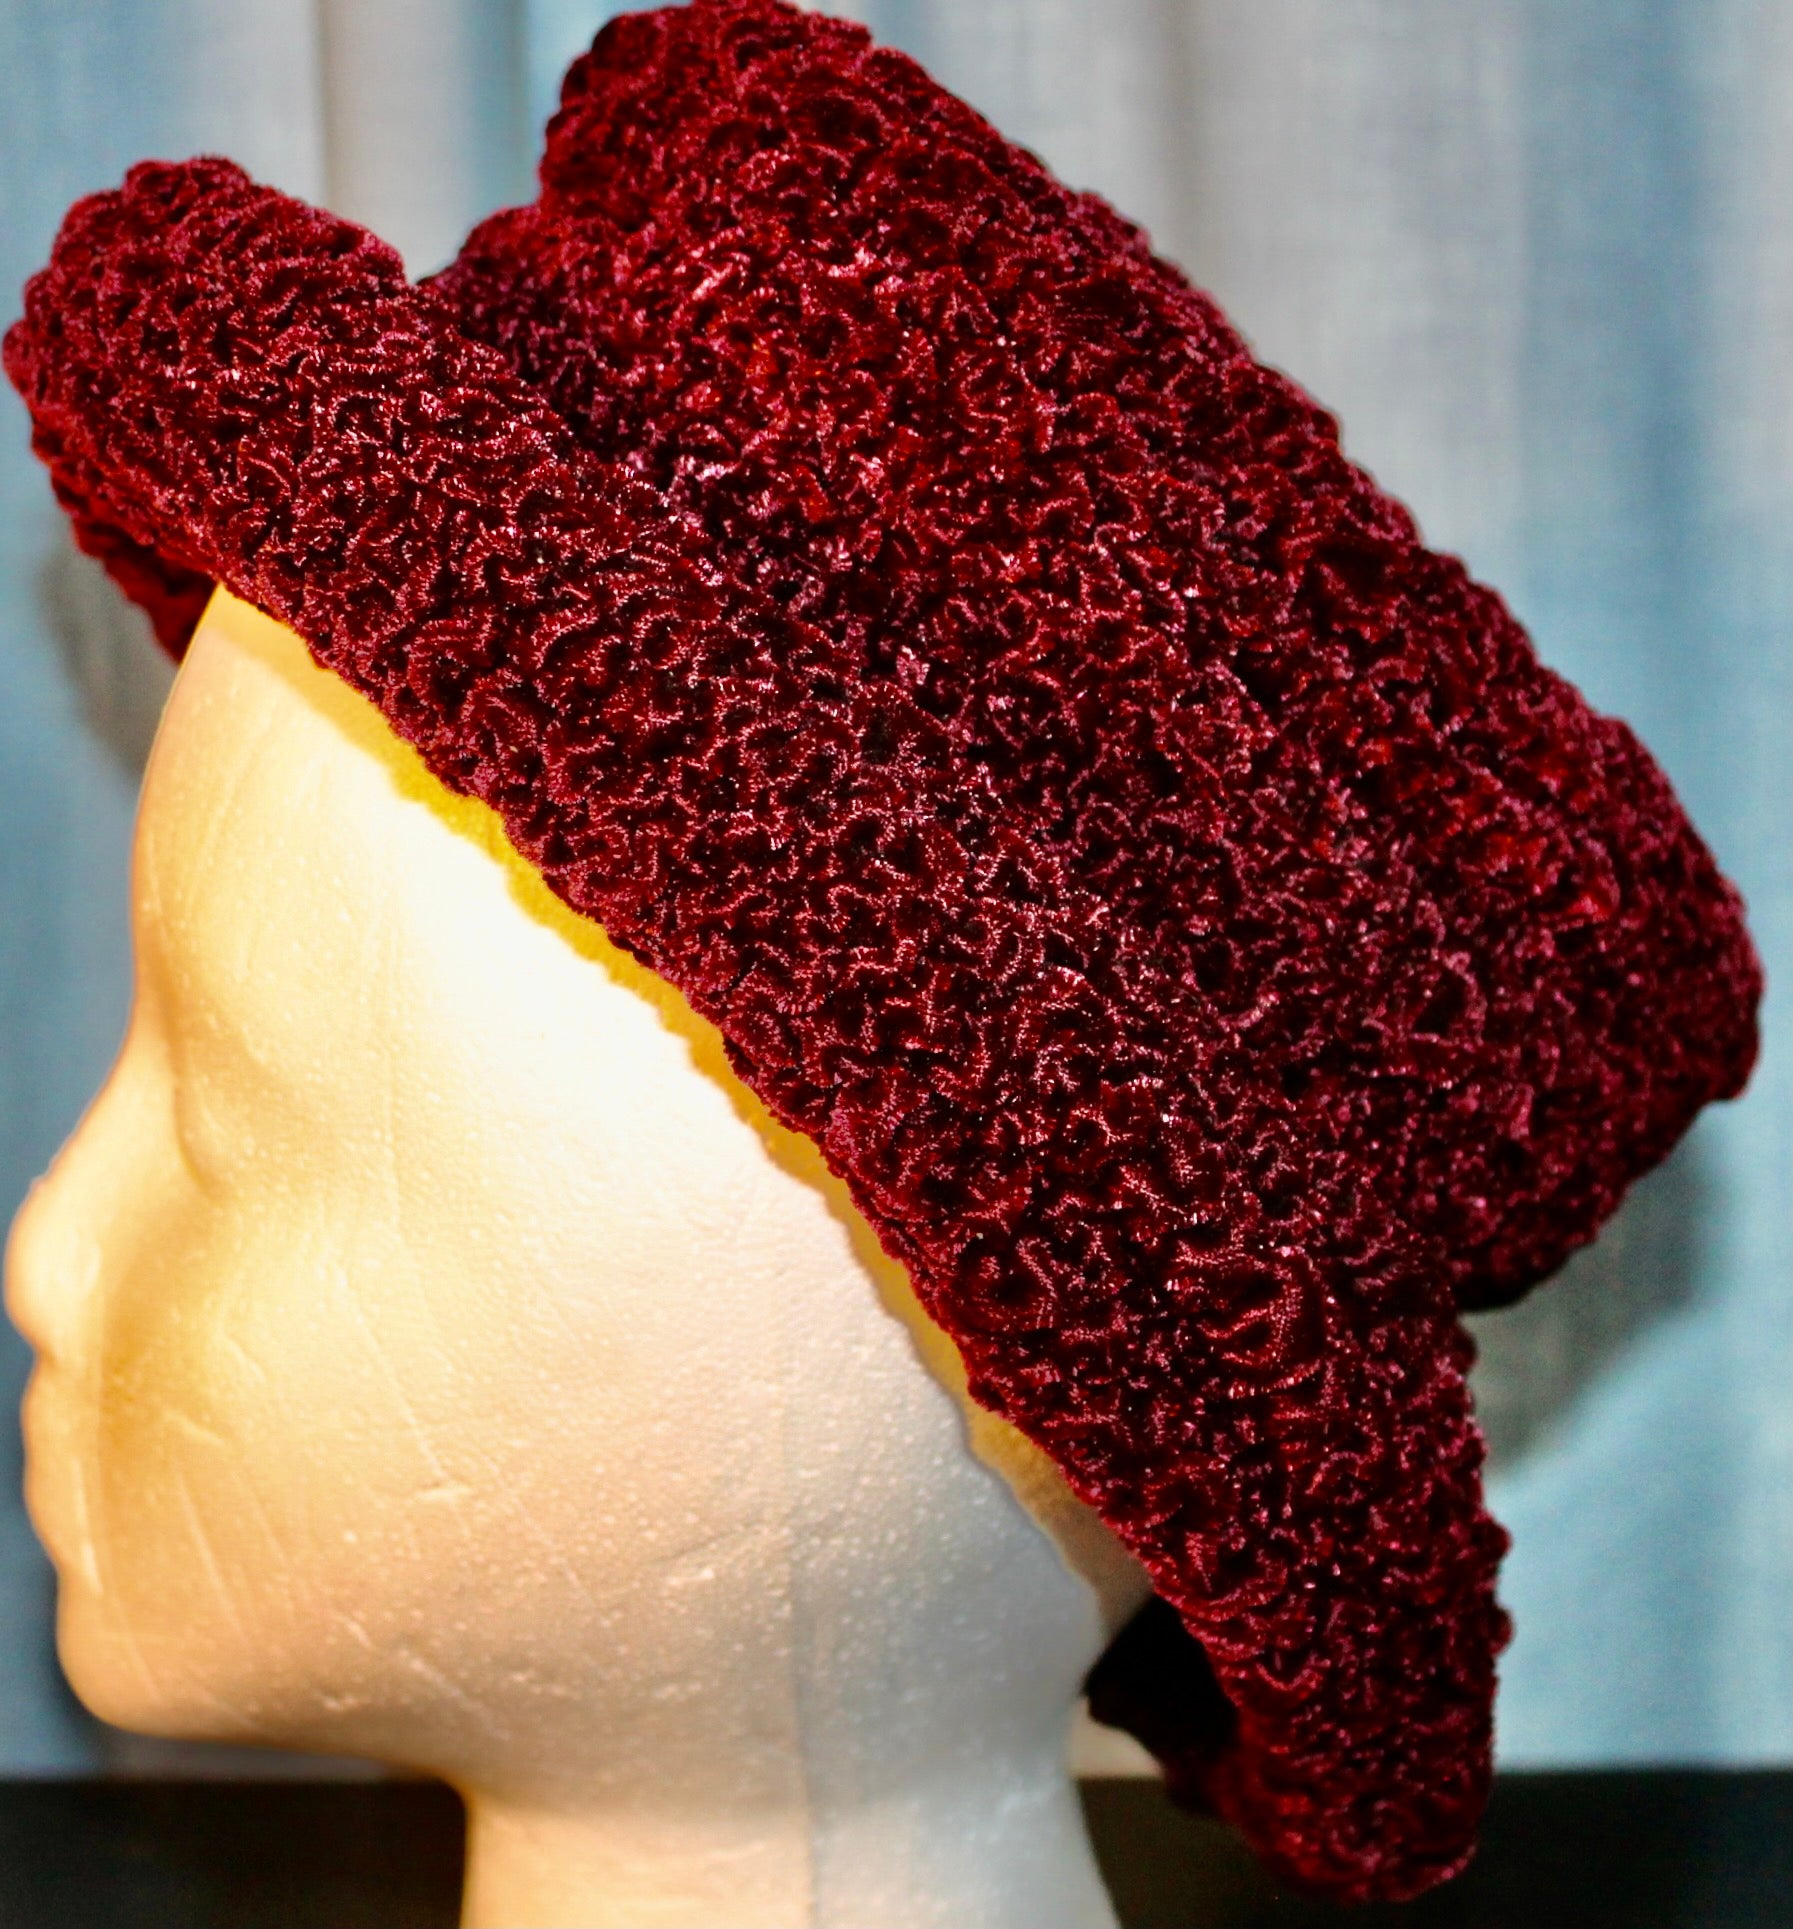 Rushed Cranberry Velvet, and Satin lining, makes a small brimmed flat top,(but soft)
hat. Measures 12 x 8